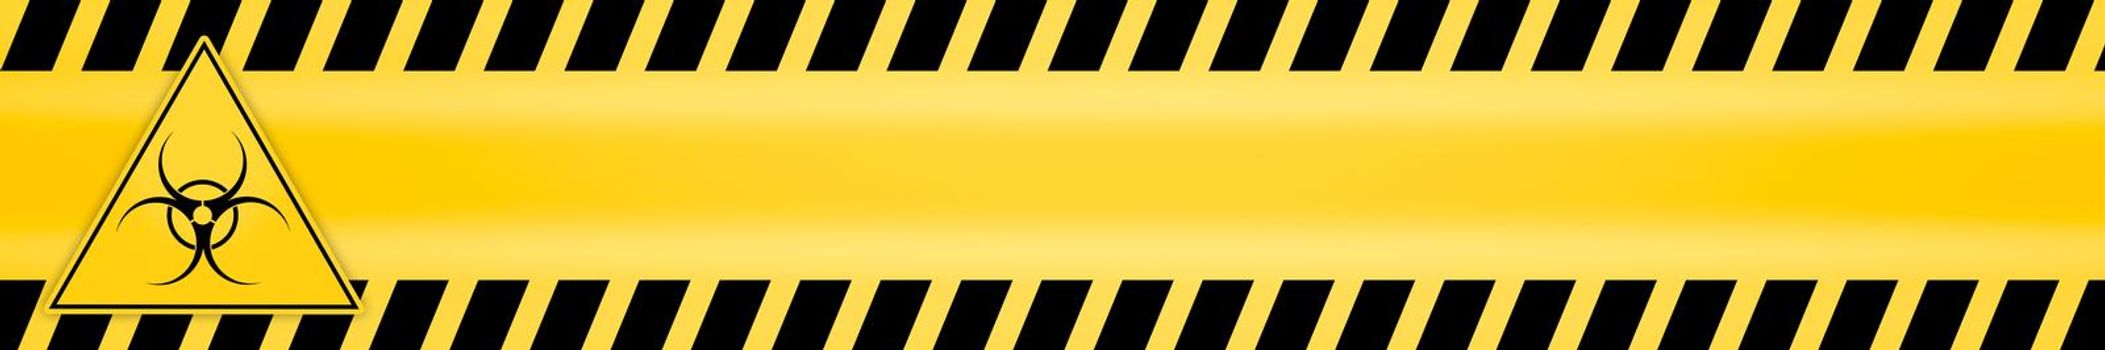 Danger ribbon and sign Attention biohazard and falling warning signs Caution tape restricted access safety and hazard stripes alert symbols